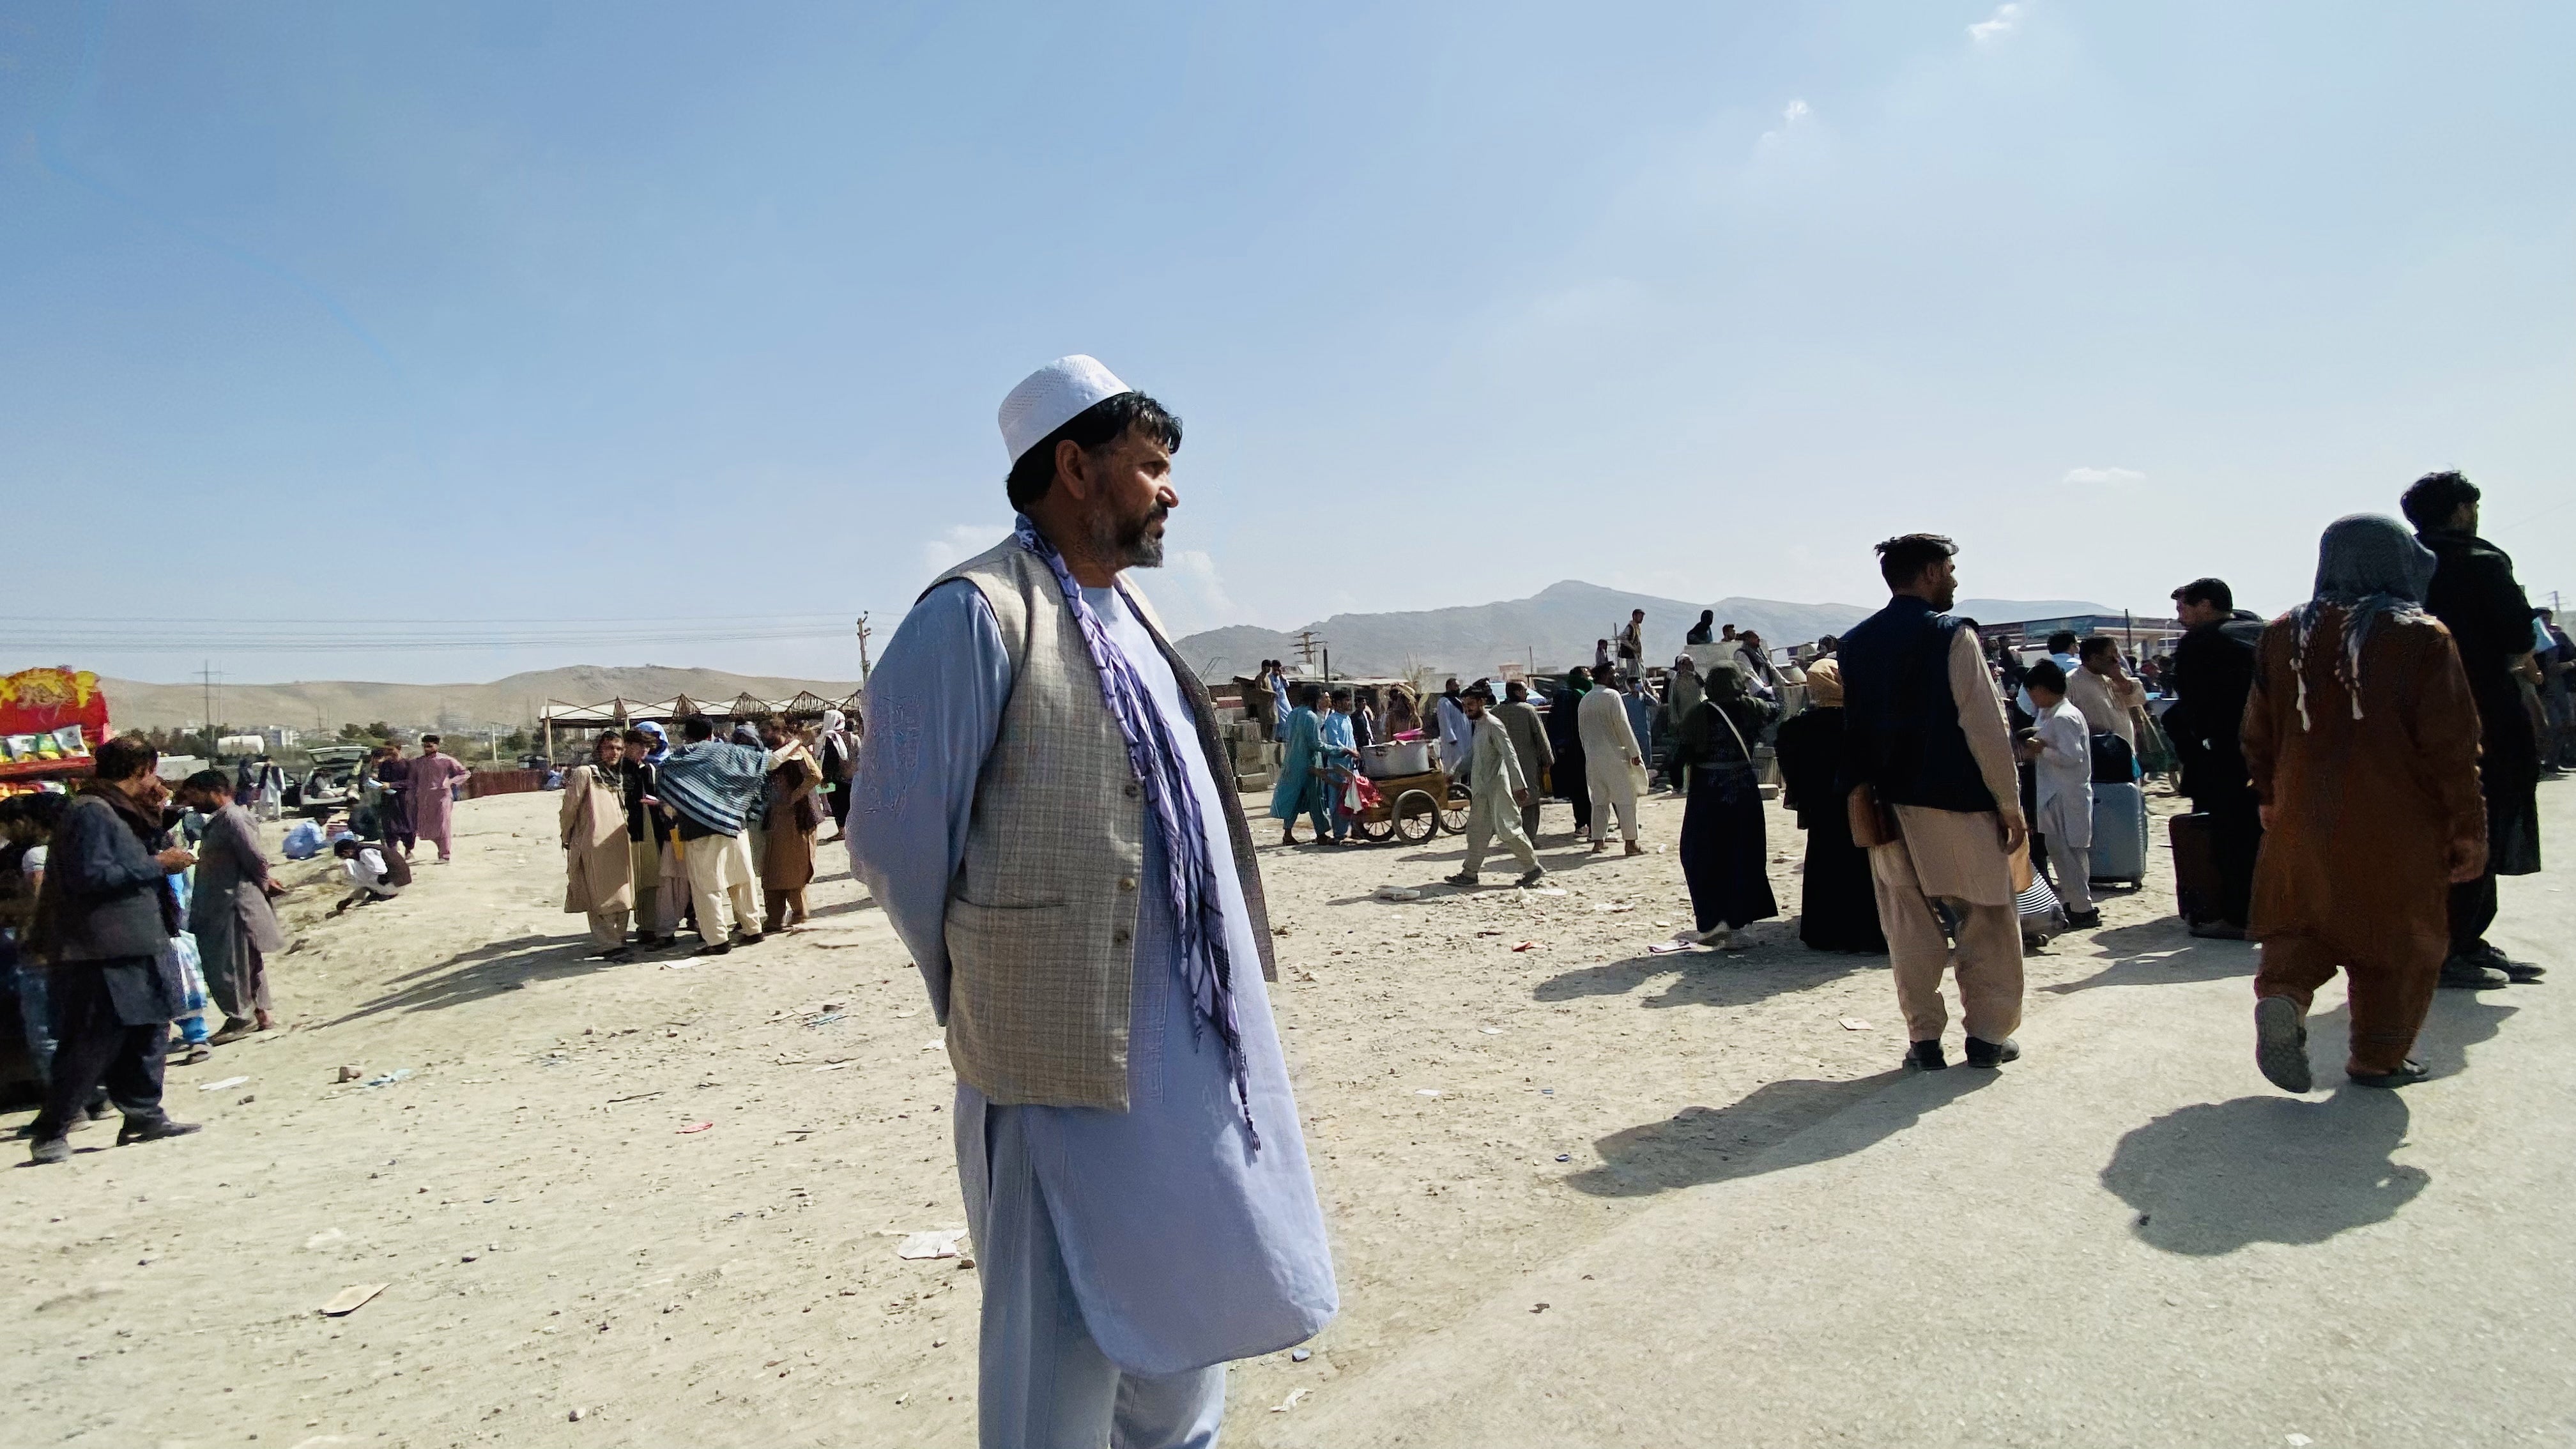 Afghans gather outside the Hamid Karzai International Airport to flee the country, in Kabul, Afghanistan, 19 August 2021